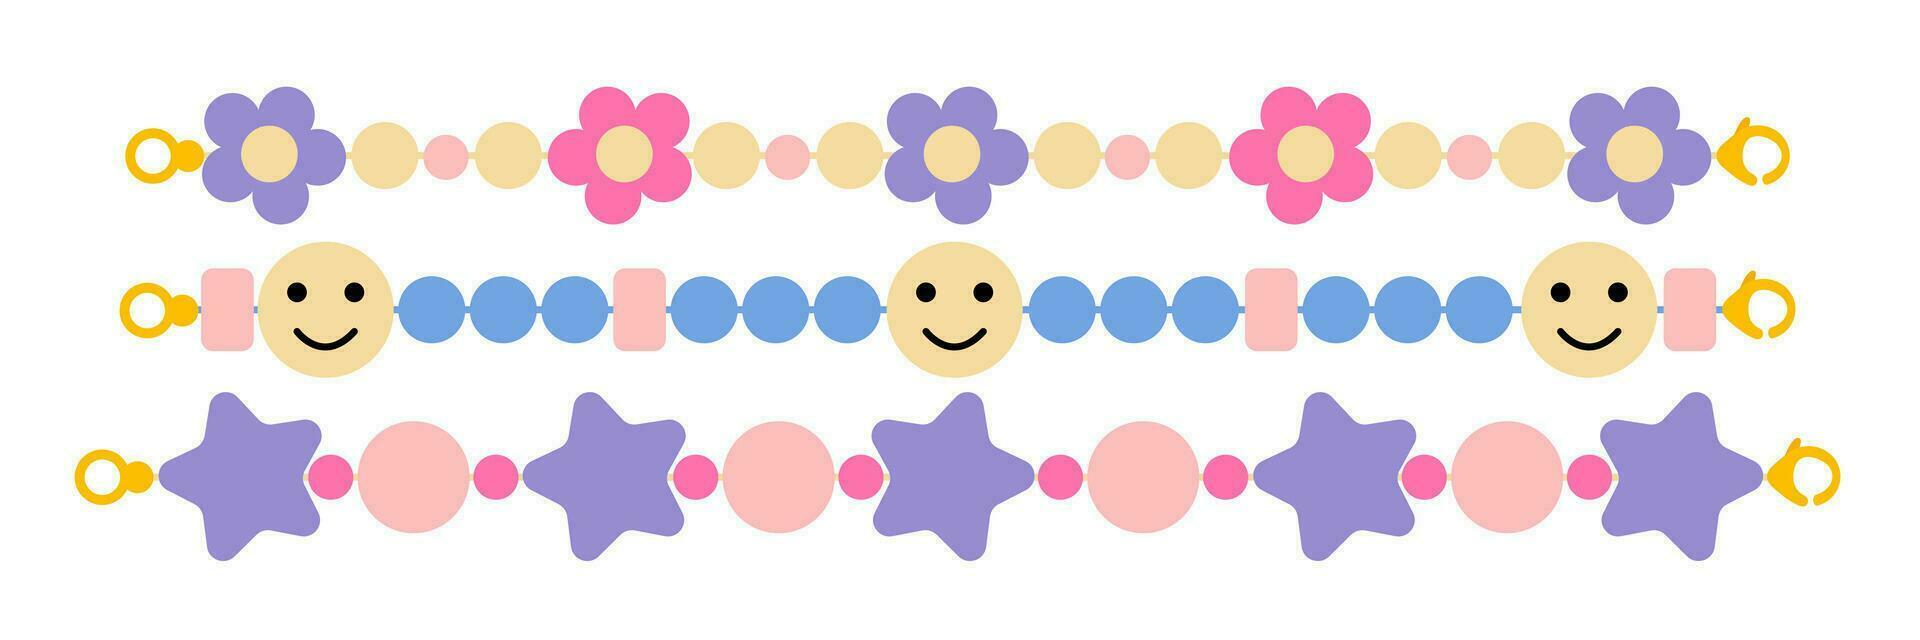 Plactic bead bracelets wit flowers, stars and smiles vector set